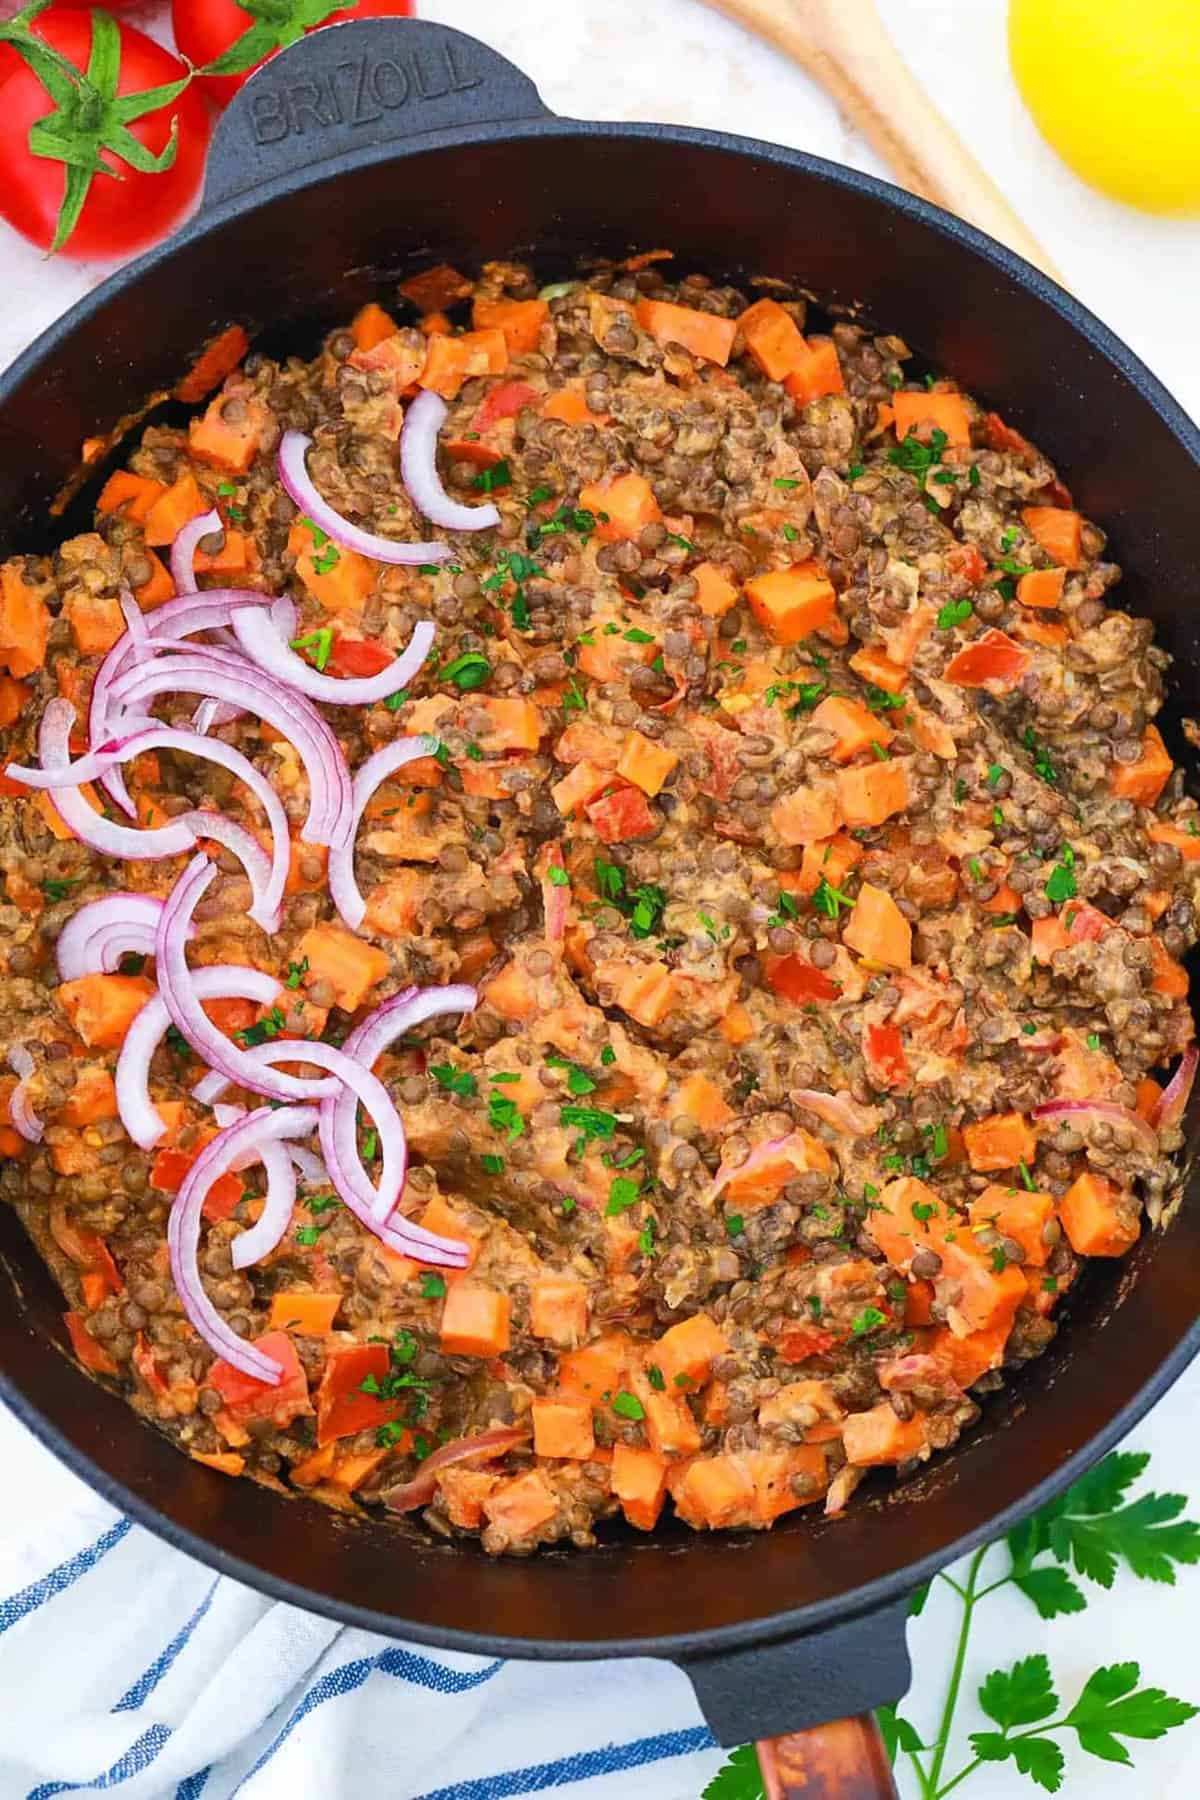 Vegan dinner recipe for lentils and tahini served in a cast iron skillet, garnished with red onions.